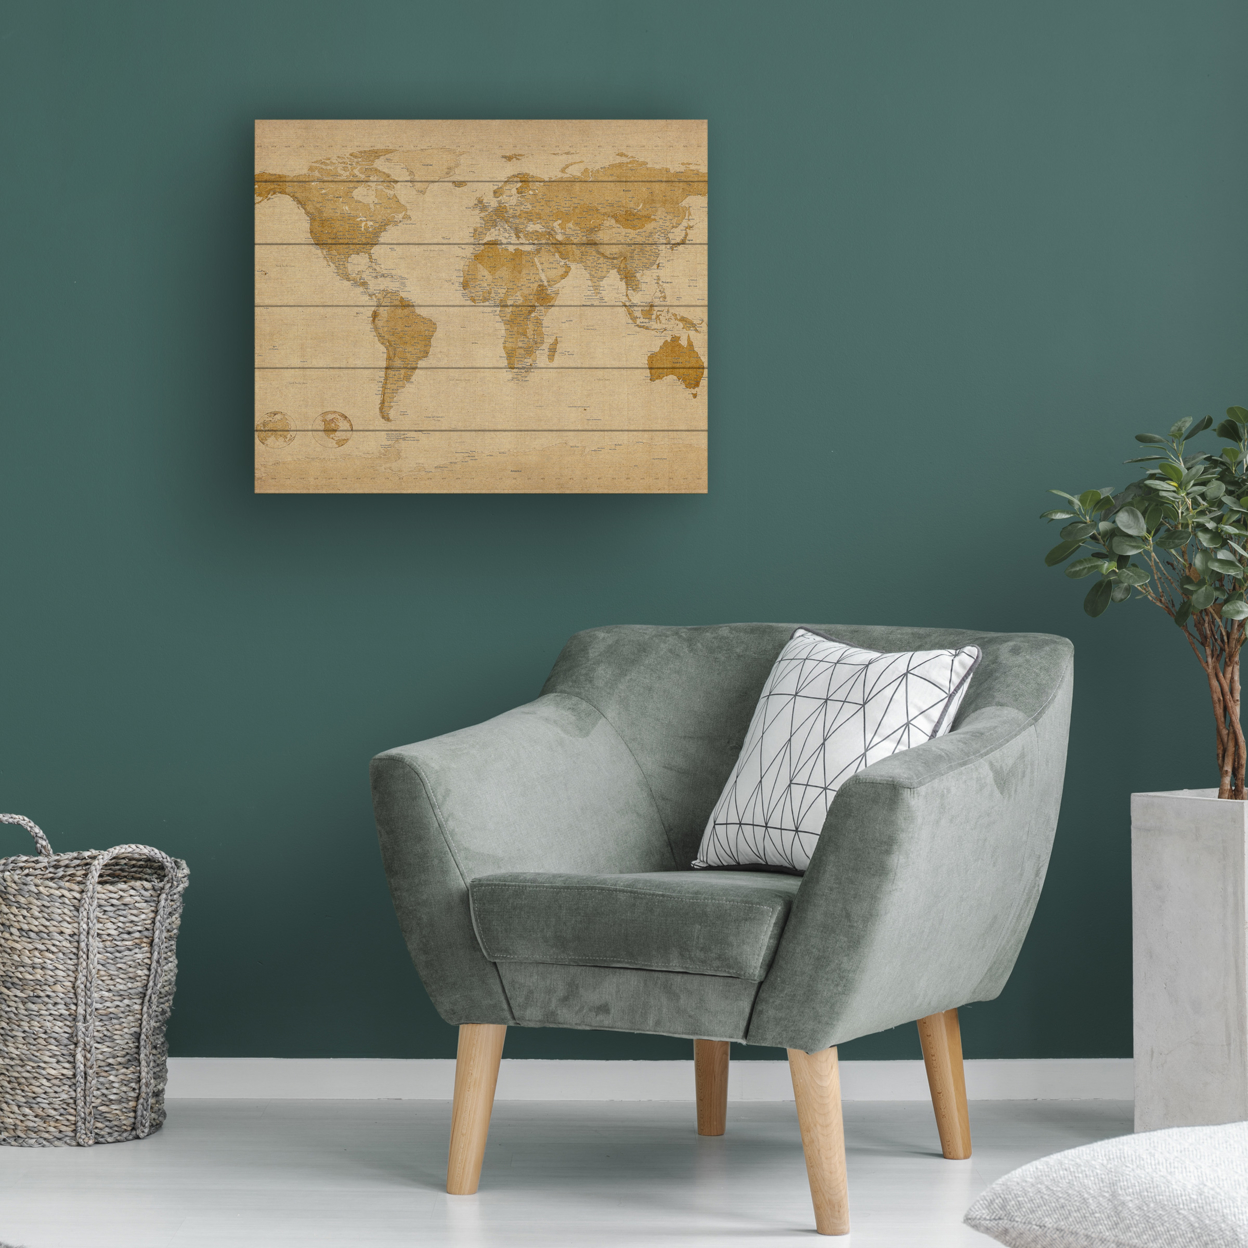 Wooden Slat Art 18 X 22 Inches Titled Antique World Map Ready To Hang Home Decor Picture